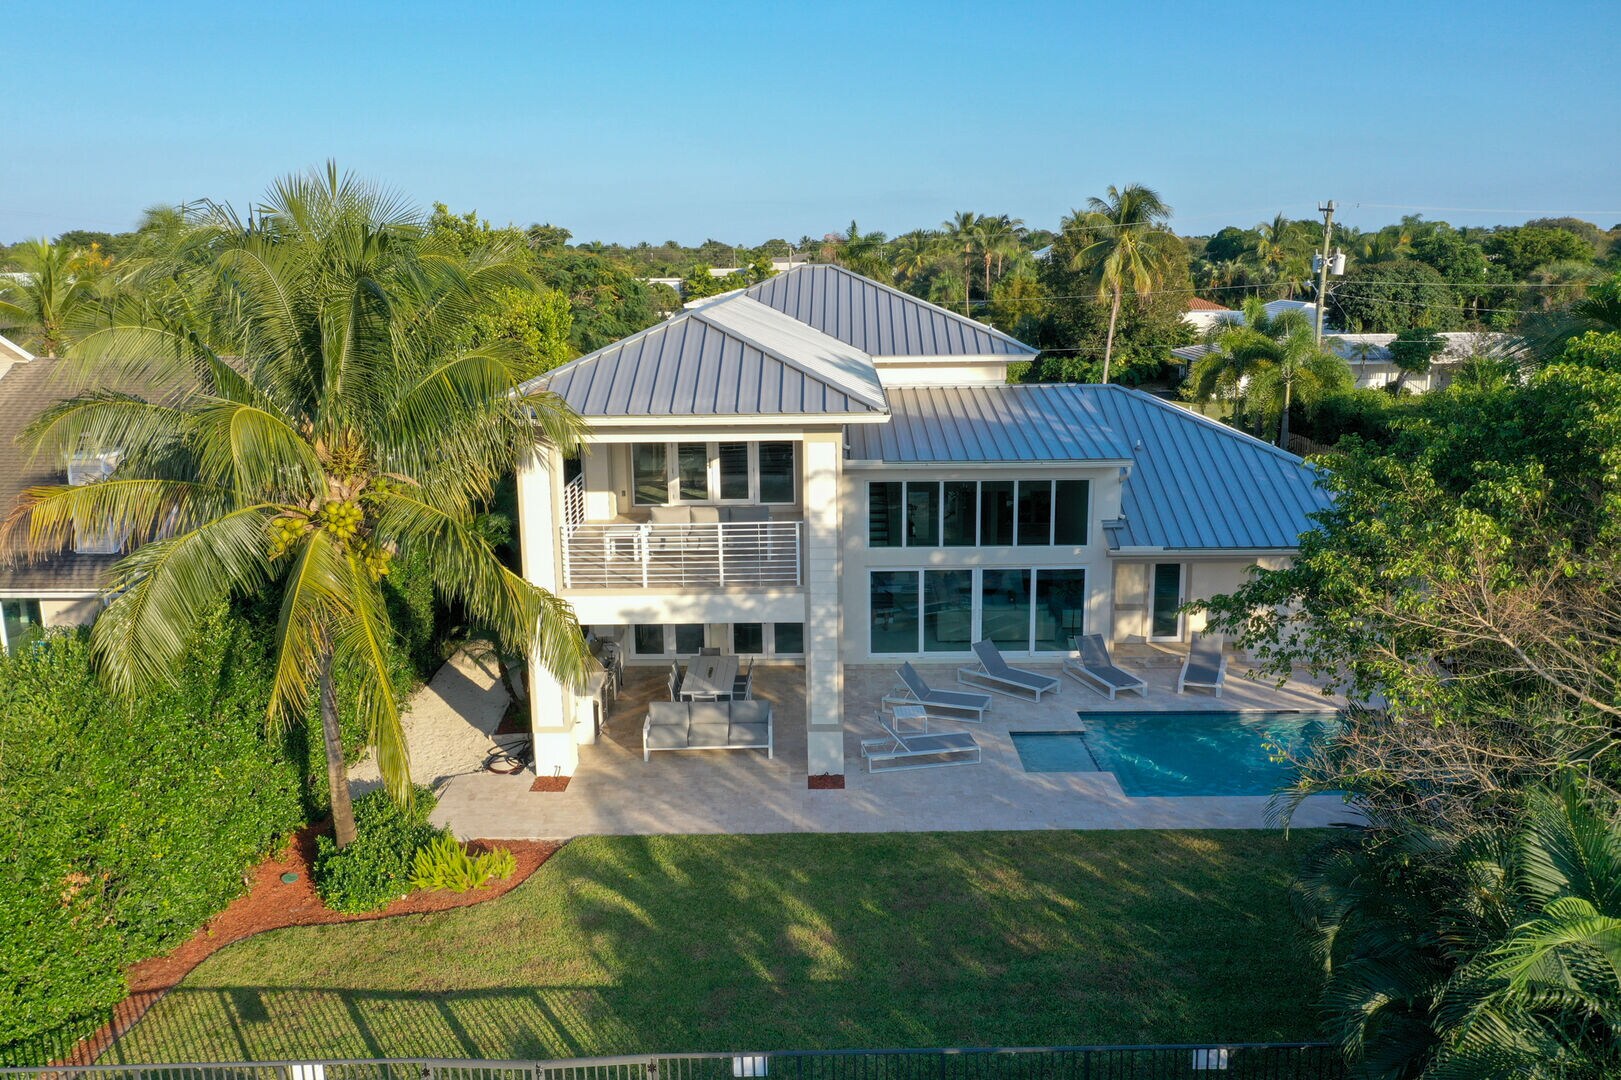 A stunning home next to the water, private, tranquil and available for your next stay in Florida